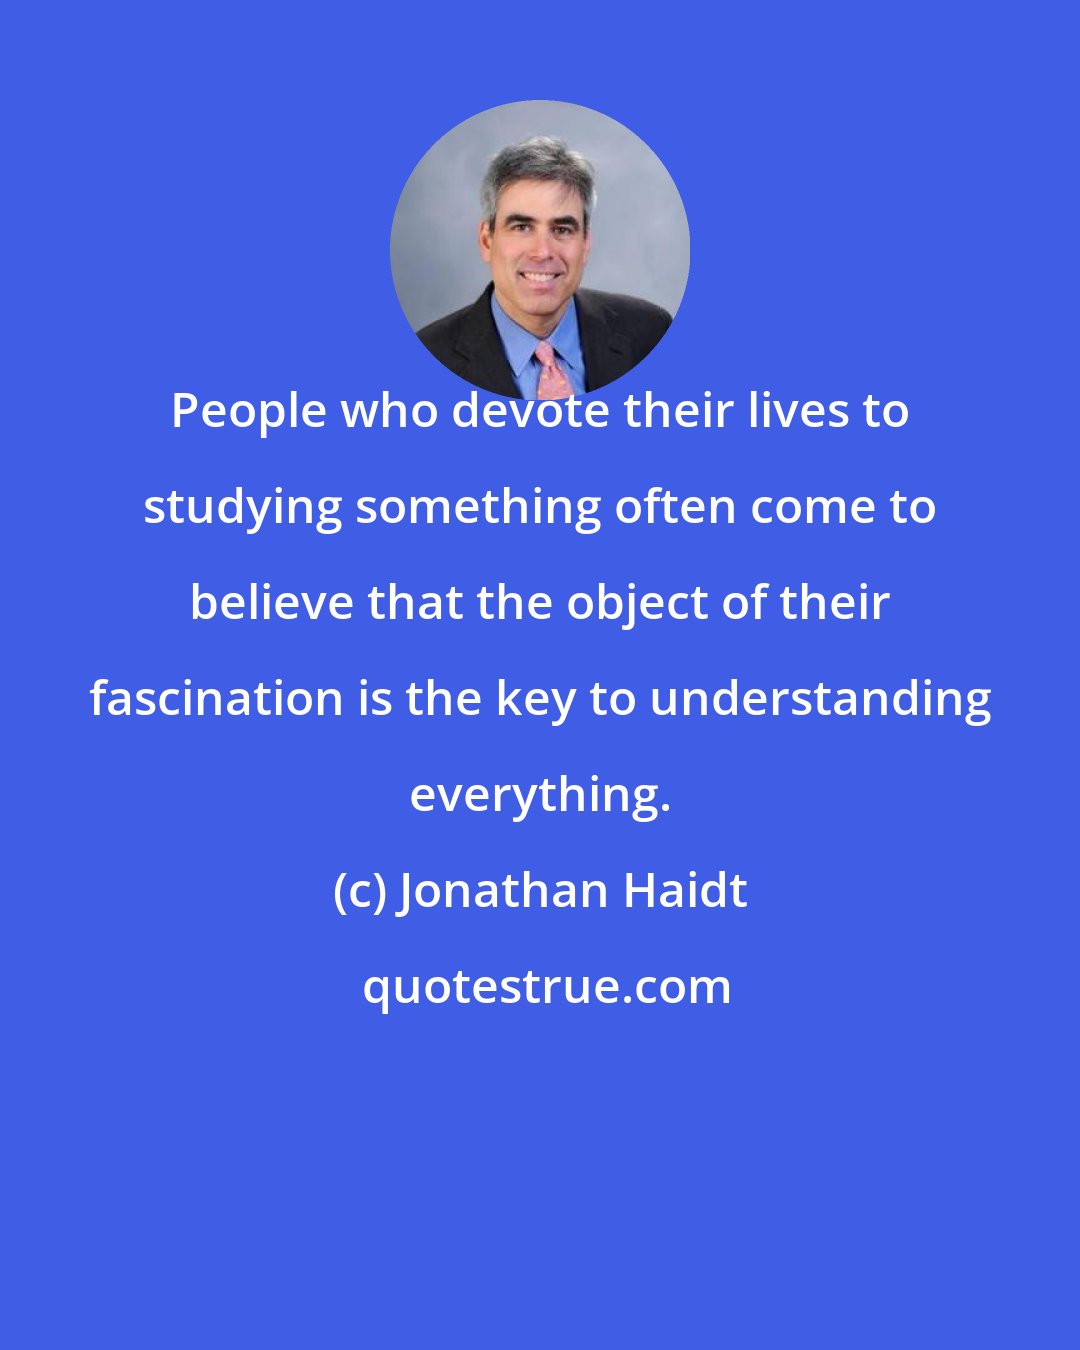 Jonathan Haidt: People who devote their lives to studying something often come to believe that the object of their fascination is the key to understanding everything.